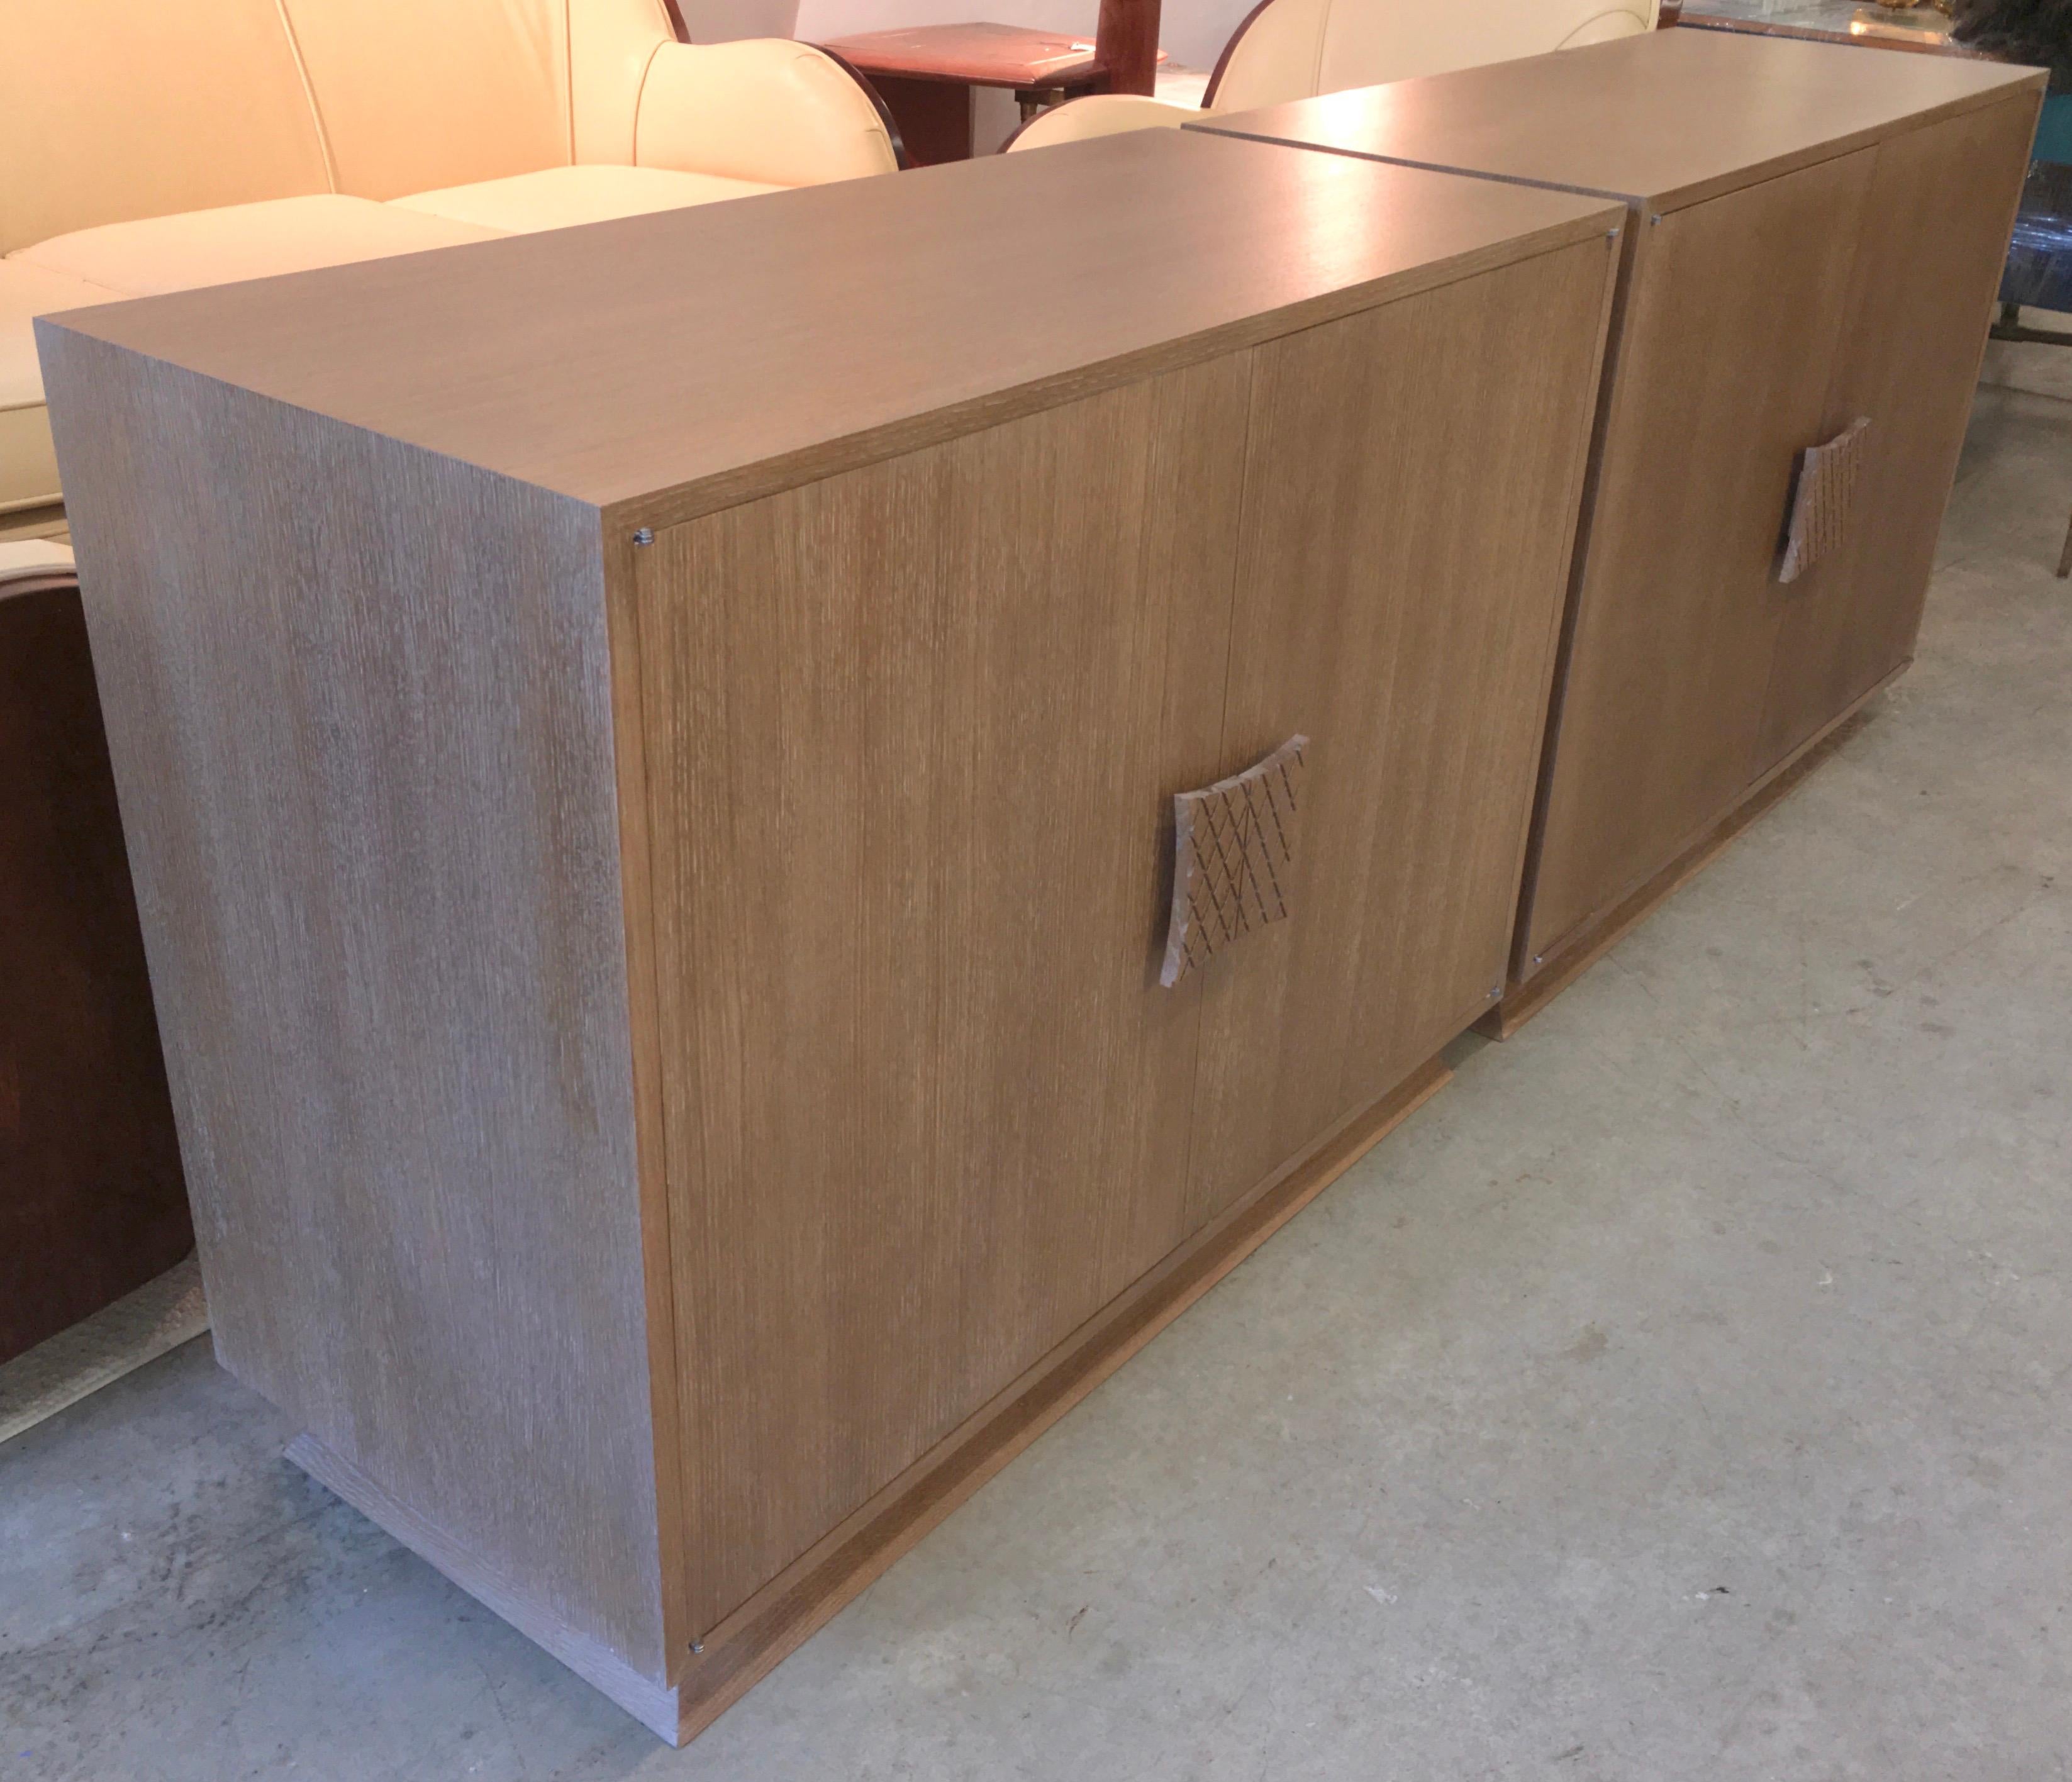 Ernst Schwadron Limed Oak Cabinet In Excellent Condition For Sale In Hanover, MA